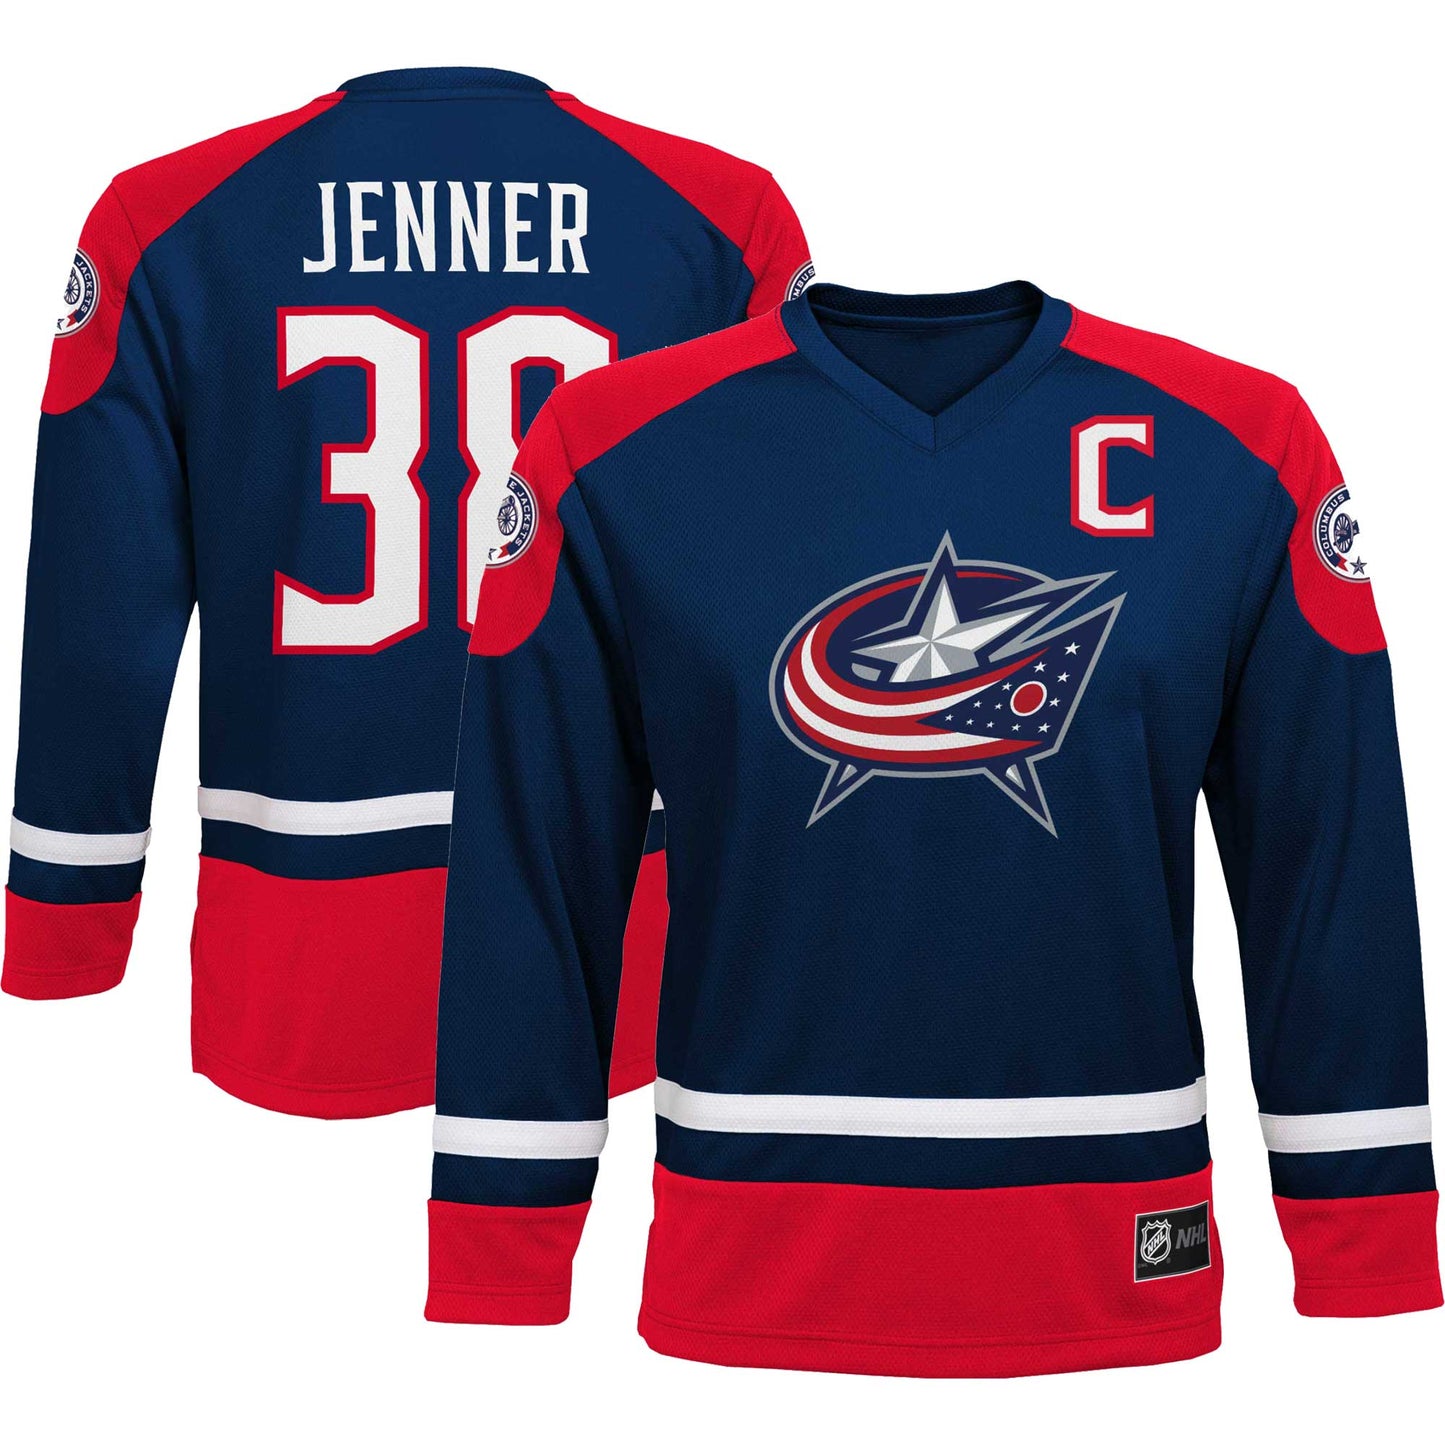 Youth Boone Jenner Navy Columbus Blue Jackets Player Jersey